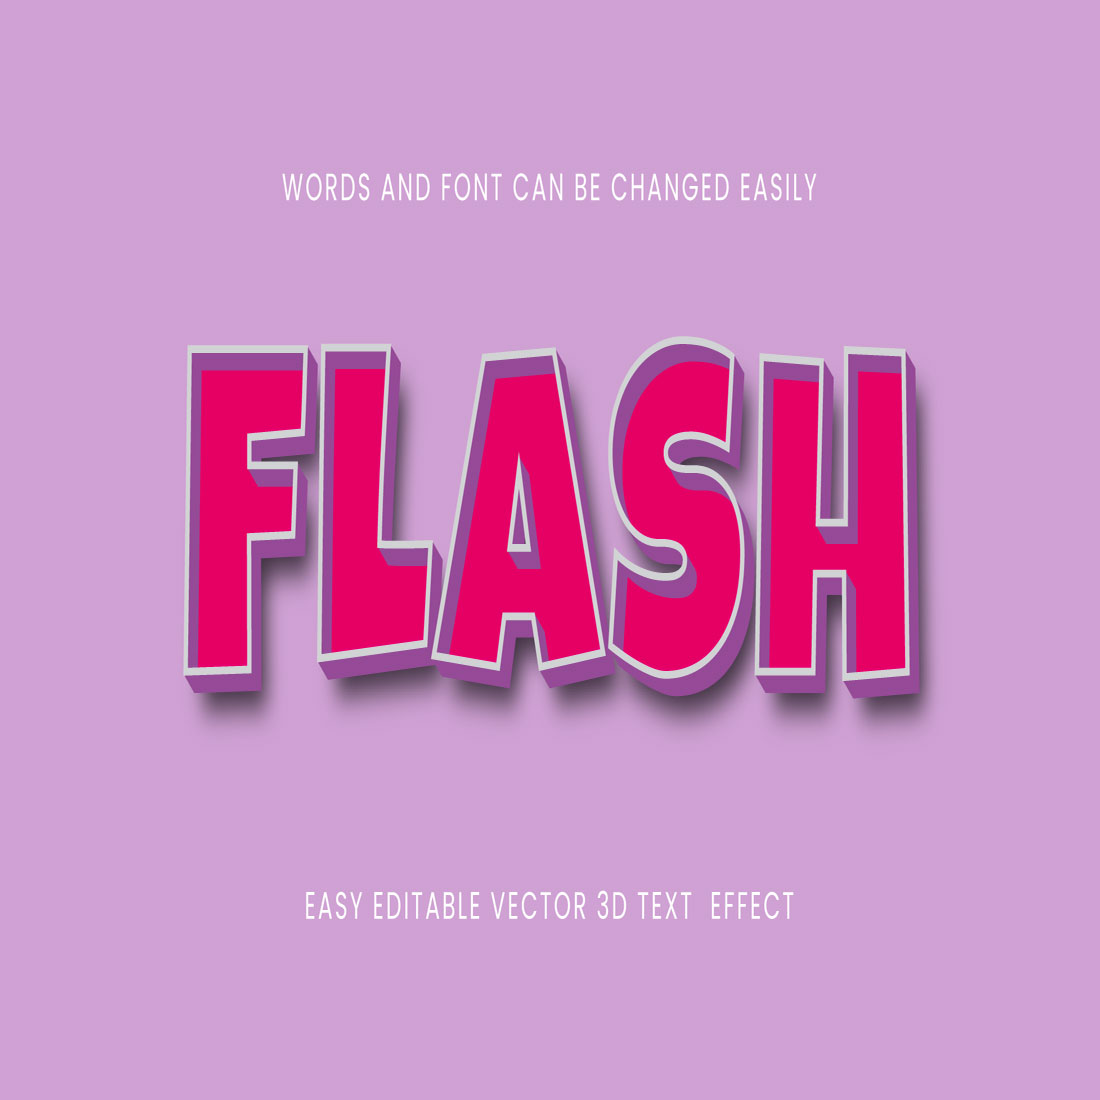 Vector 3d Flash Editable Text Effect Design cover image.